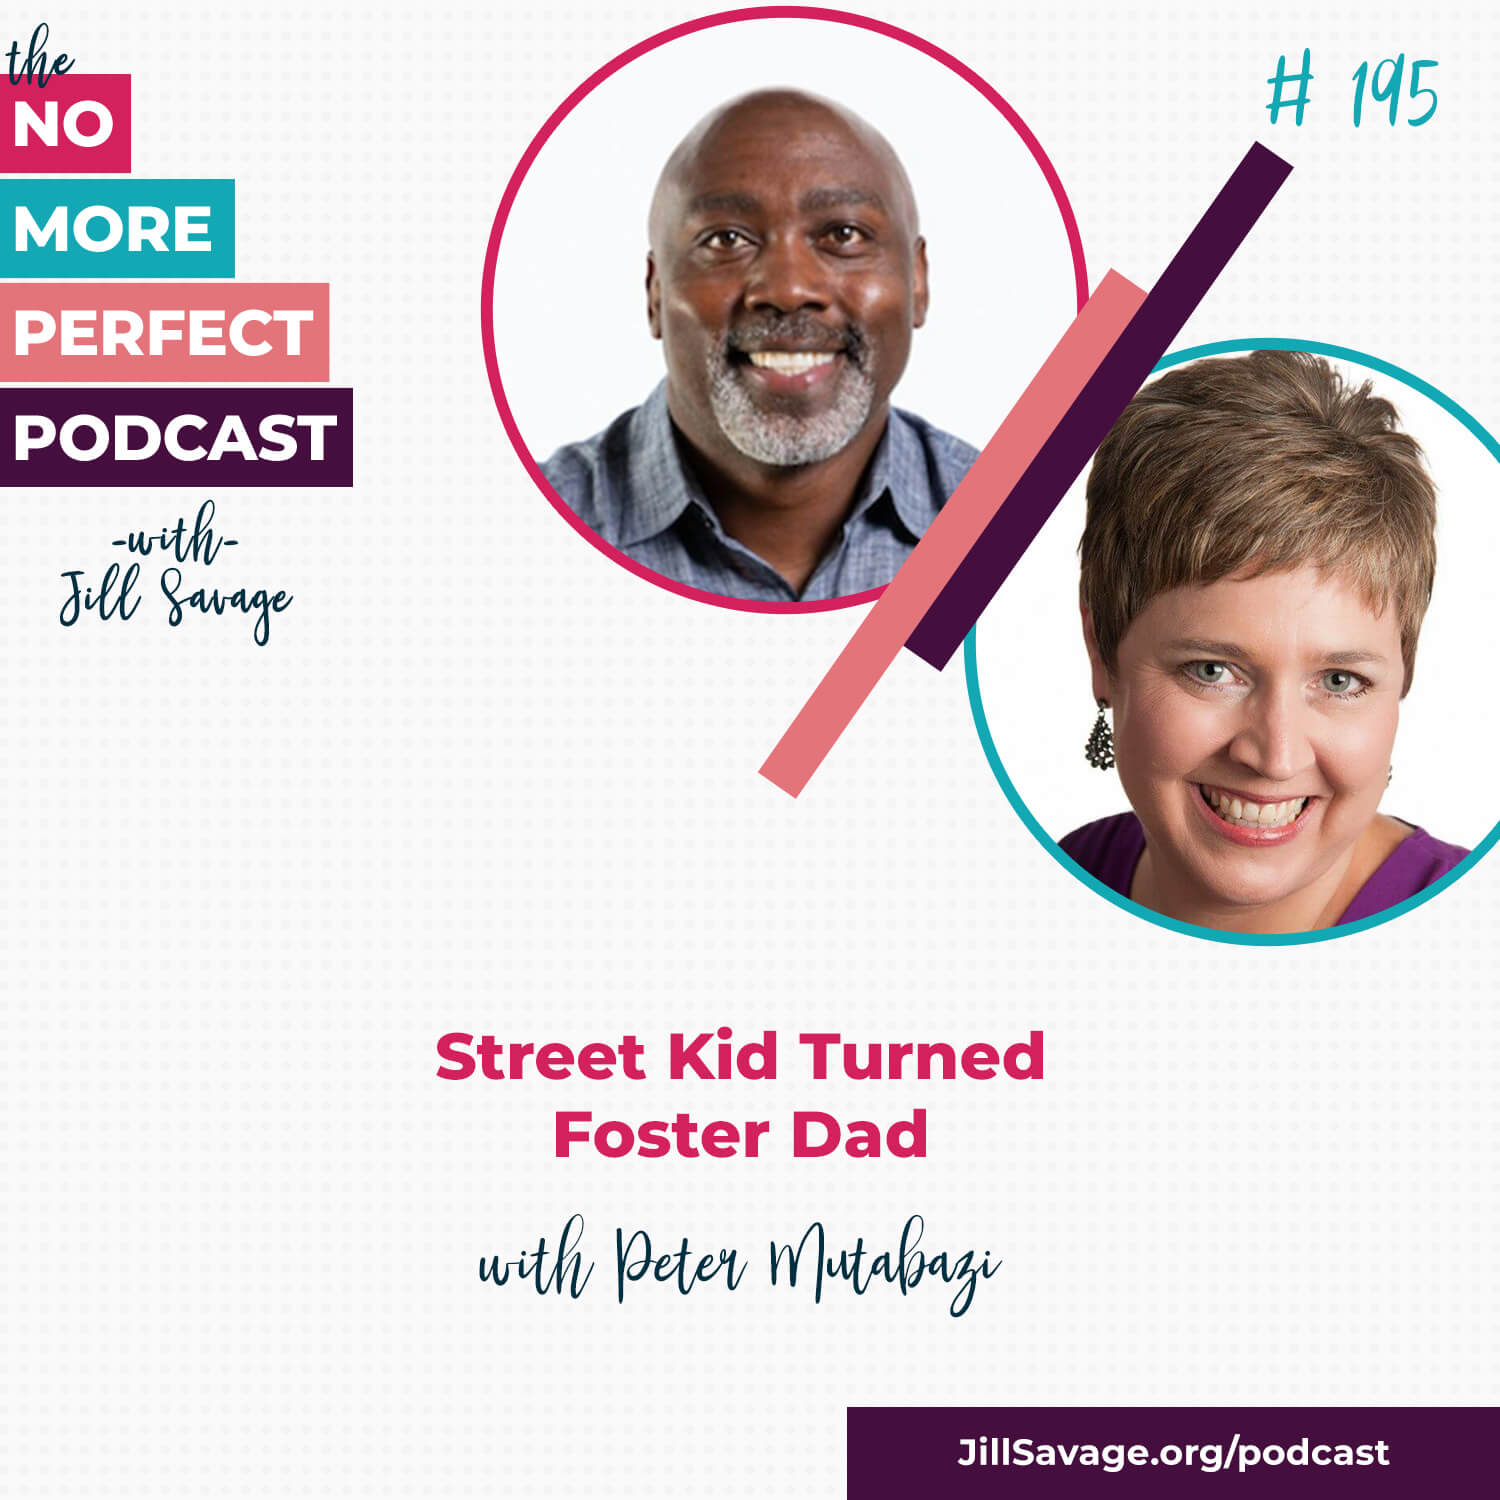 Street Kid Turned Foster Dad with Peter Mutabazi | Episode 195